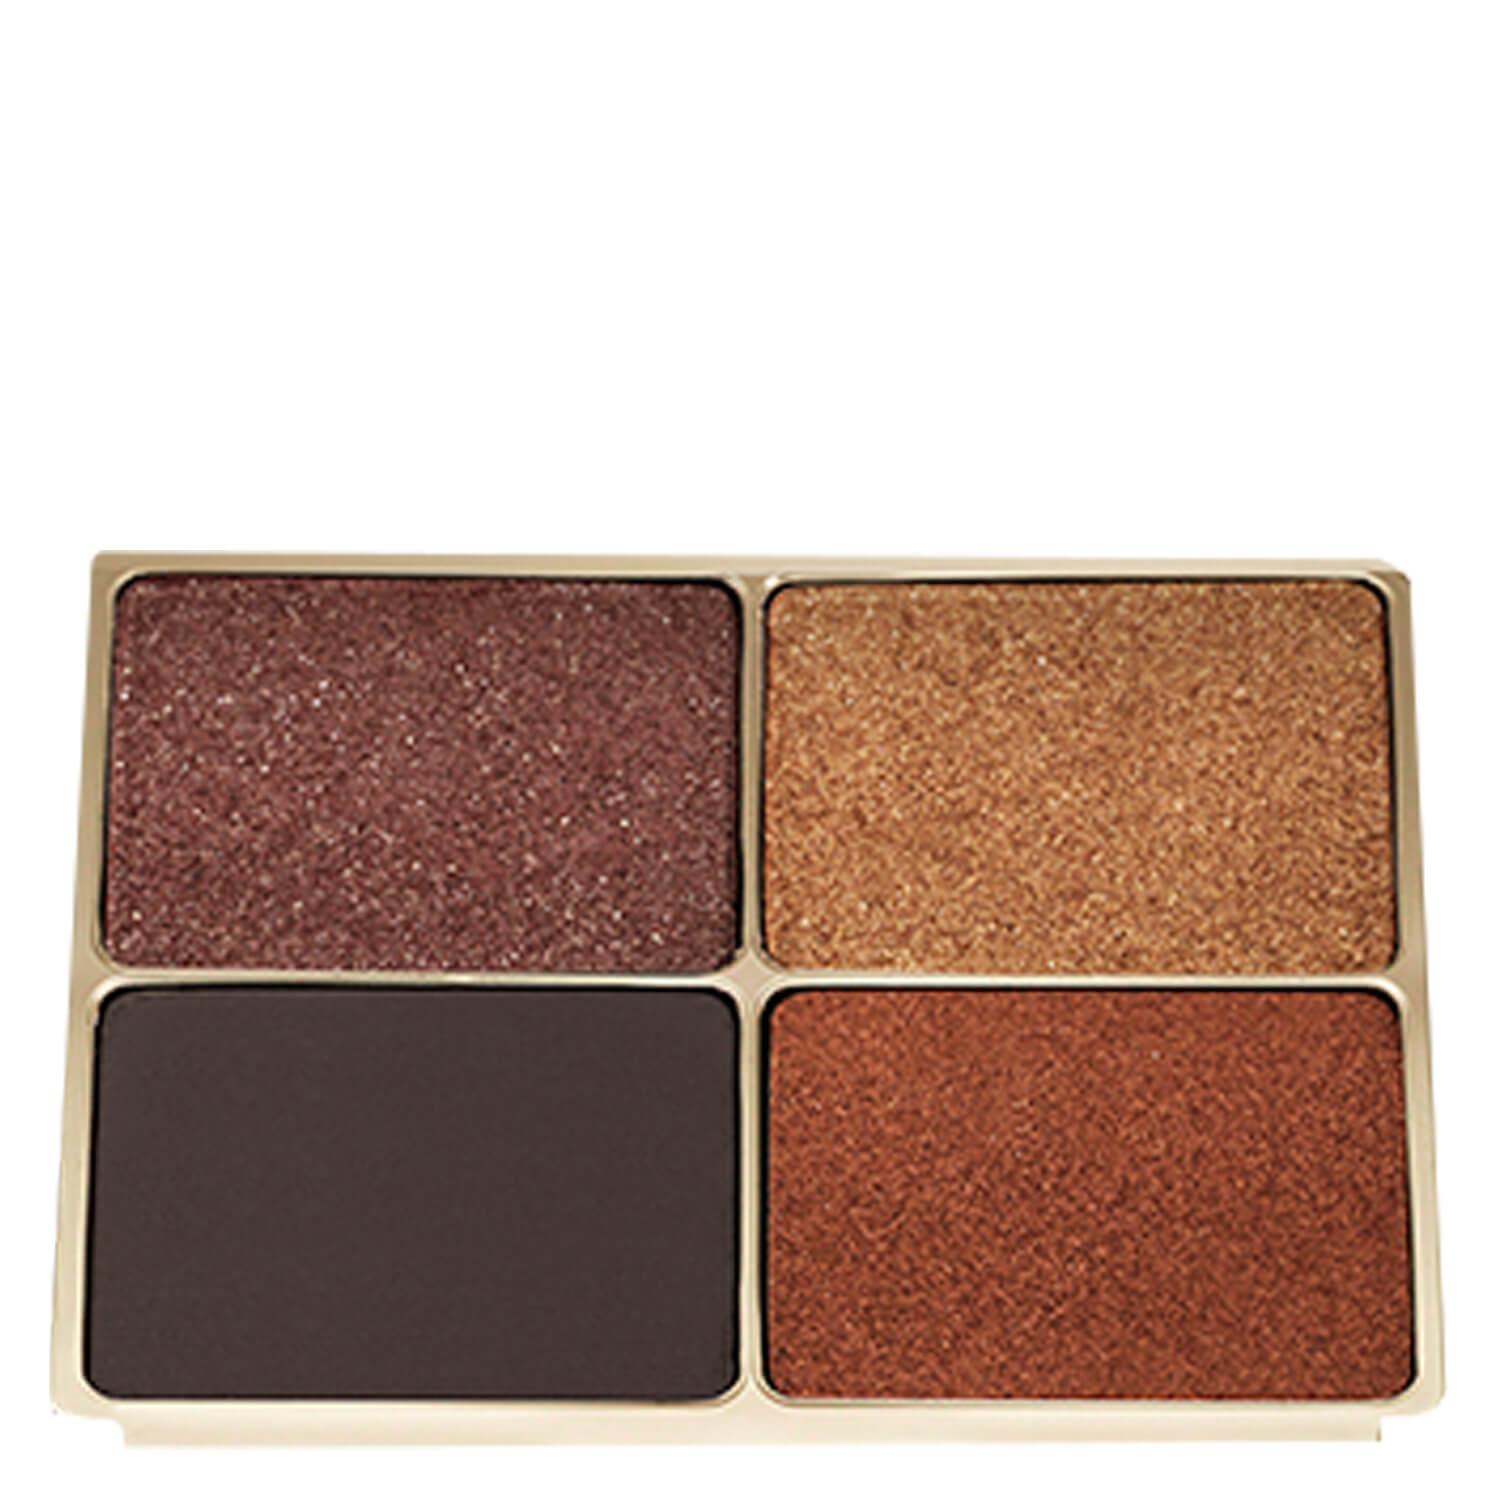 Pure Color Envy - Luxe EyeShadow Quad Wild Earth 08 Refill